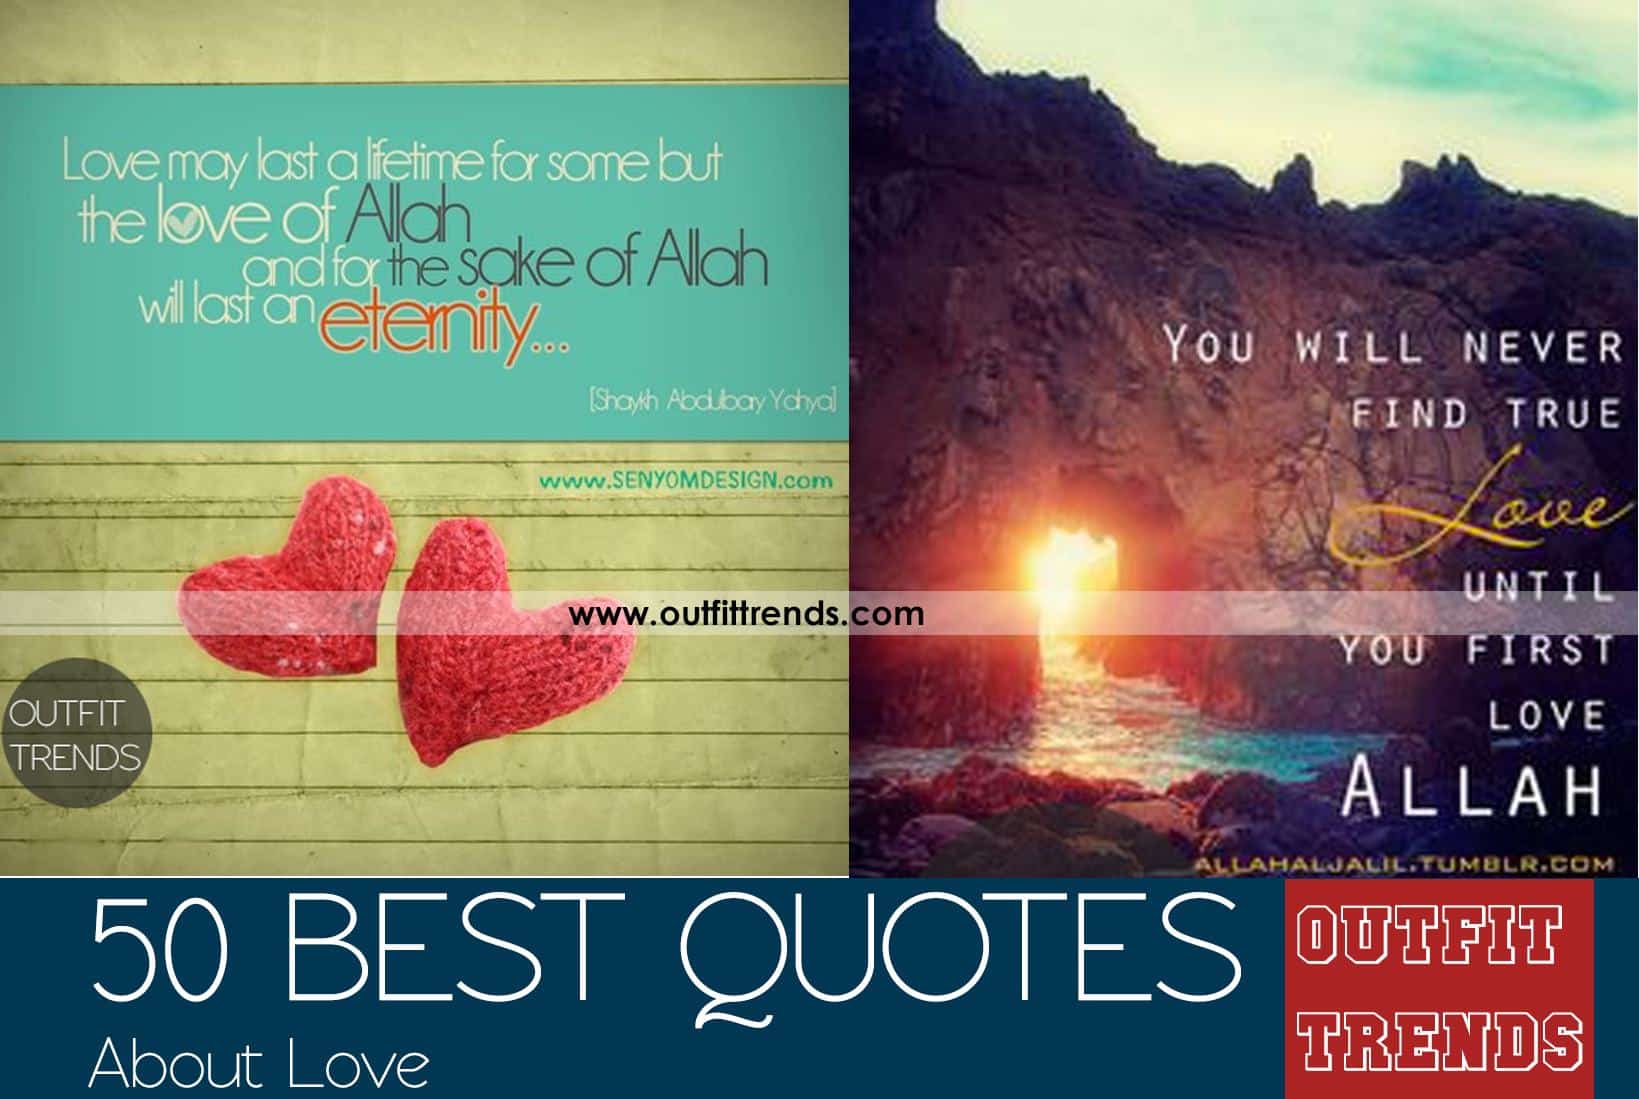 Islamic Quotes About Love-50 Best Quotes About Love in Islam